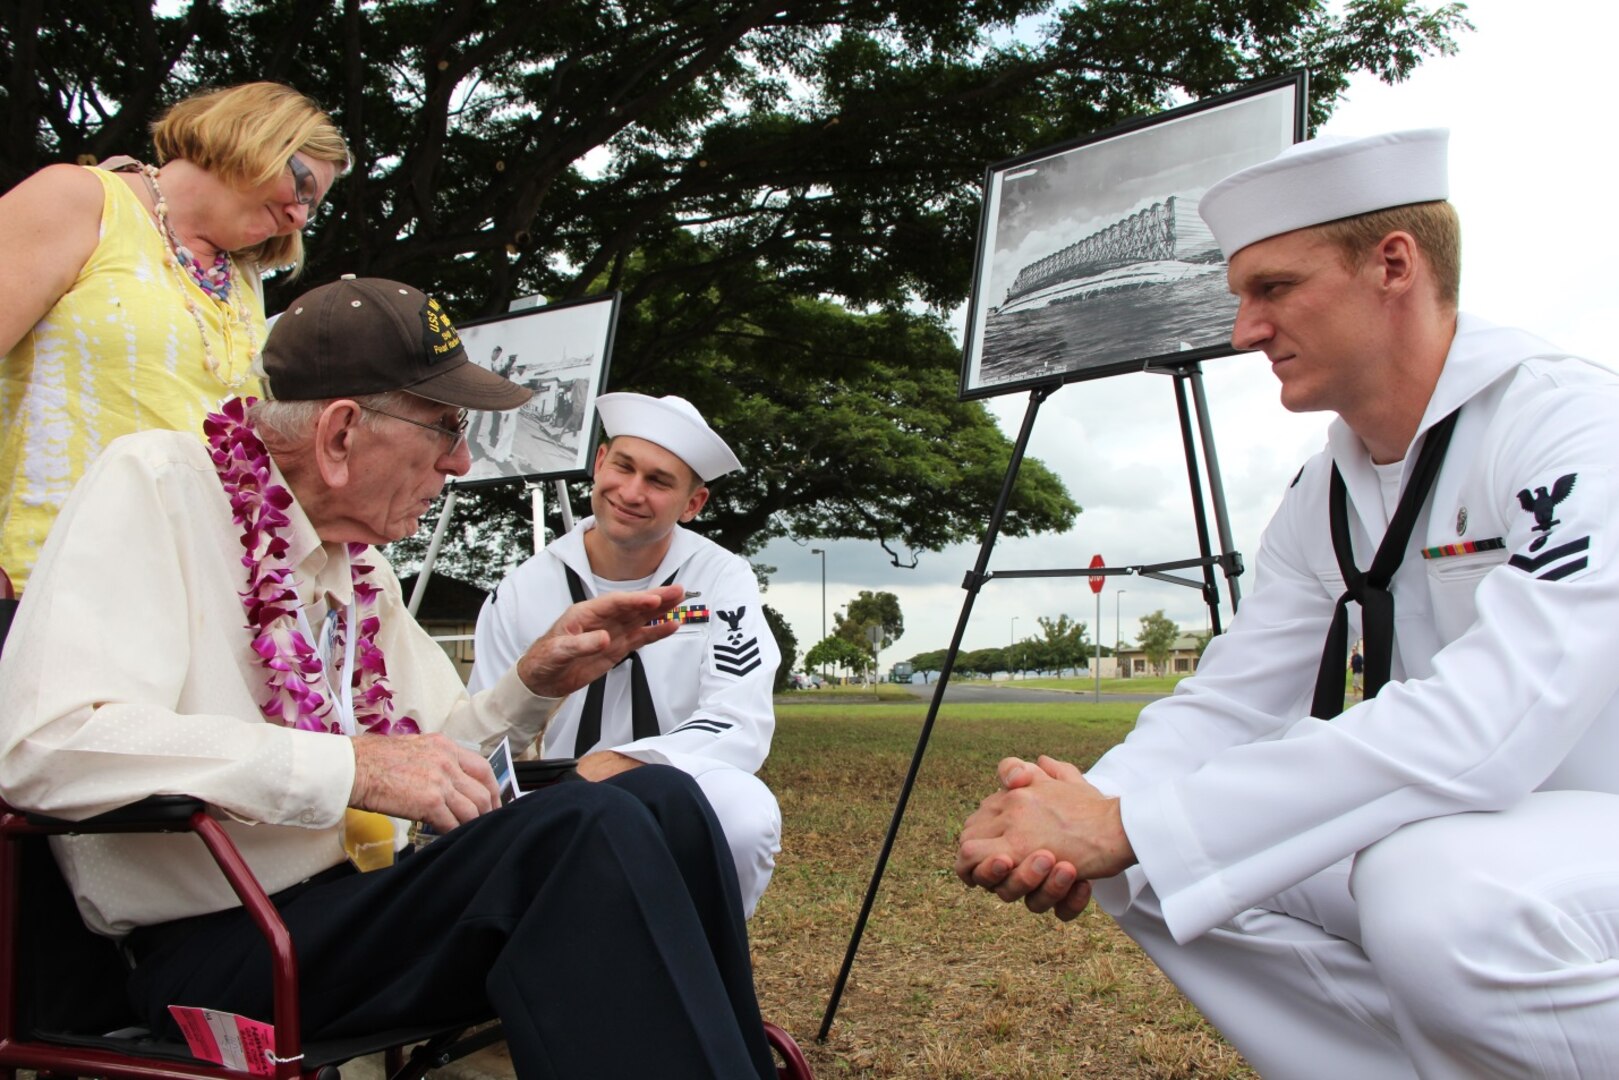 PEARL HARBOR, Hi. (Dec. 7, 2016) Former USS Maryland (BB-46) crew member and Pearl Harbor survivor Electricians Mate Floyd Welch and his daughter Laurie Broglio, share memories with Petty Officer 1st Class Thomas McMillian and Petty Officer 2nd Class Kristian Cheeks during the Dec. 7 USS Oklahoma Memorial Ceremony on Ford Island.  Petty Officers McMillian and Cheeks, both assigned to Pearl Harbor Naval Shipyard & Intermediate Maintenance Facility (PHNSY & IMF) were part of a detail which displayed photos tracking the salvage of USS Oklahoma following the attacks of Dec. 7, 1941.